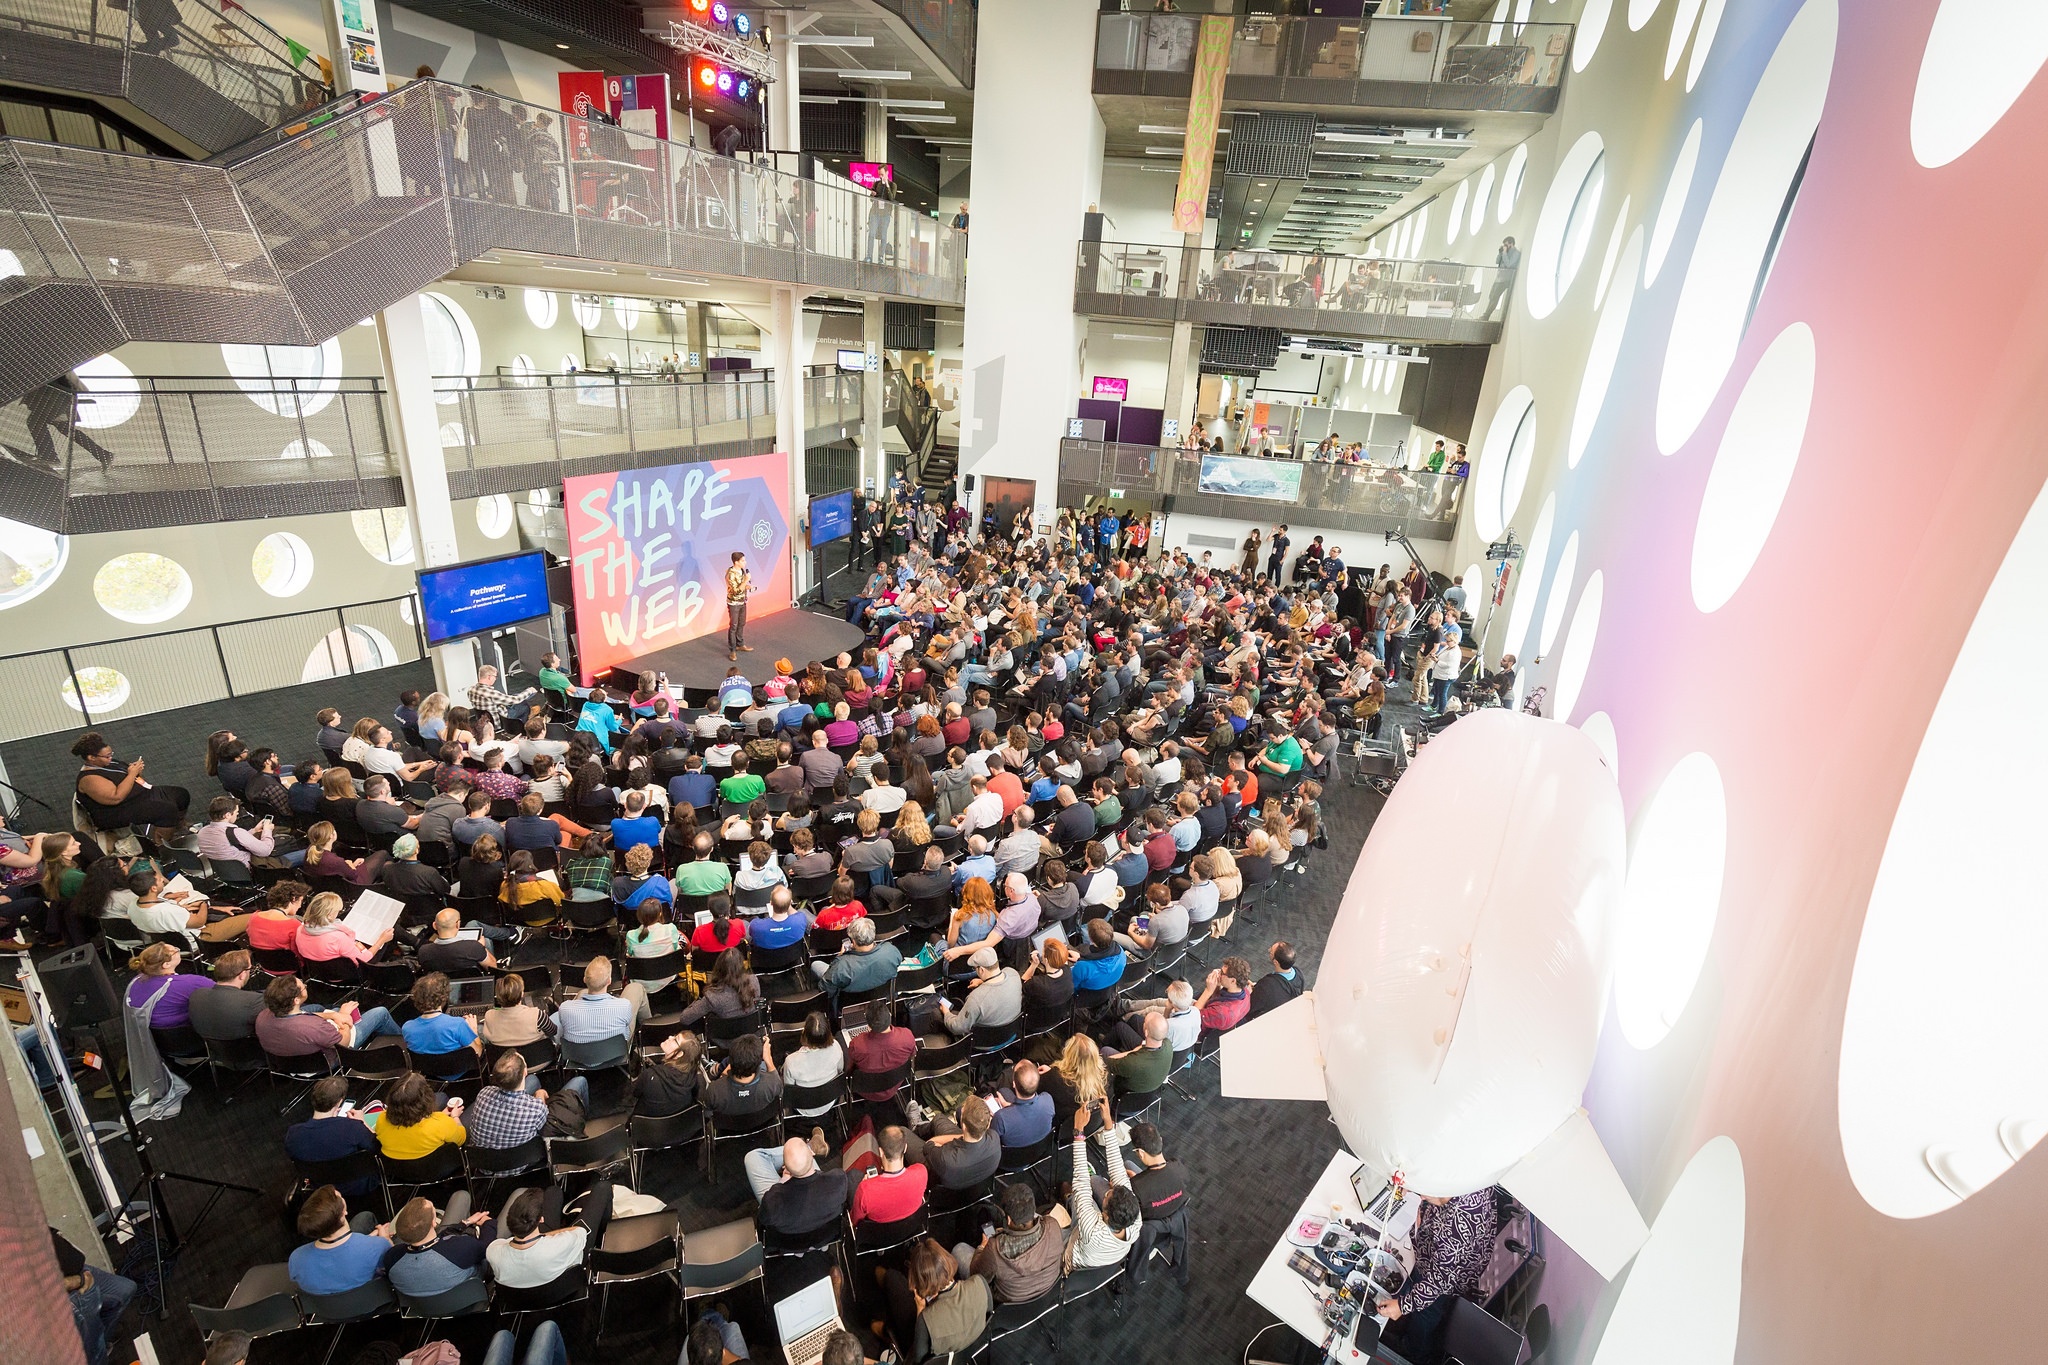 Arts Award is calling for proposals for MozFest 2016